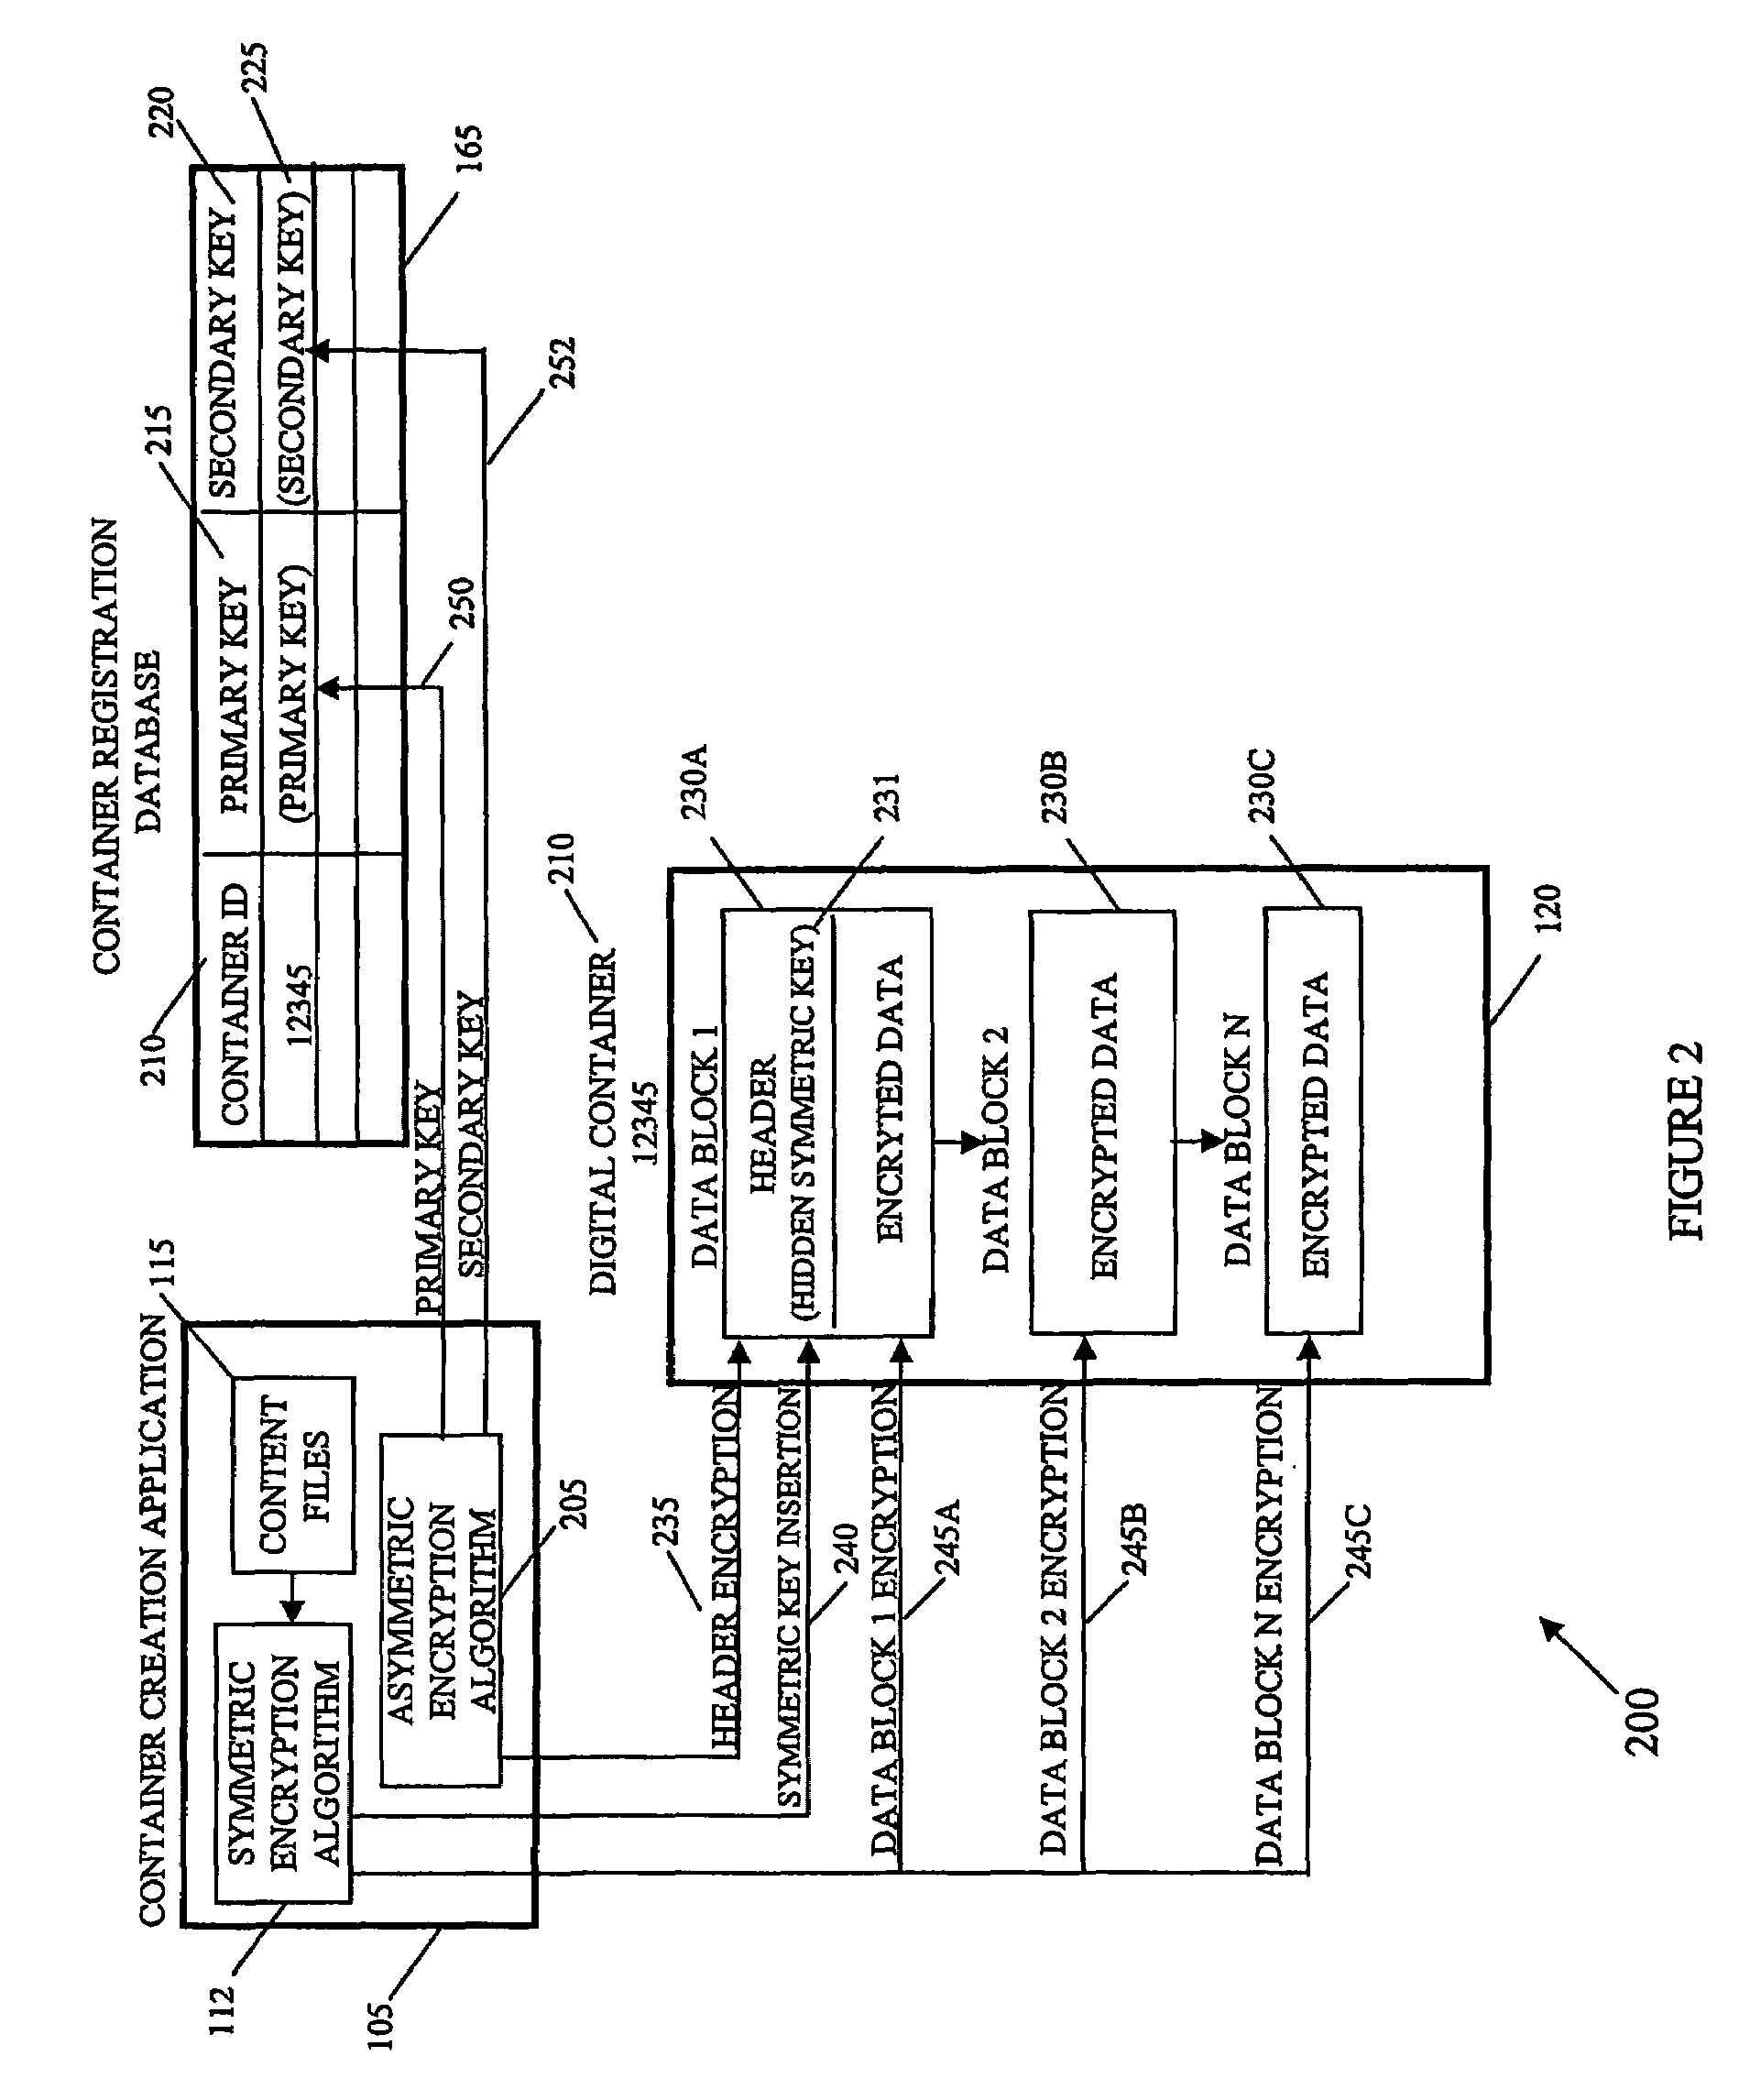 Securing digital content system and method